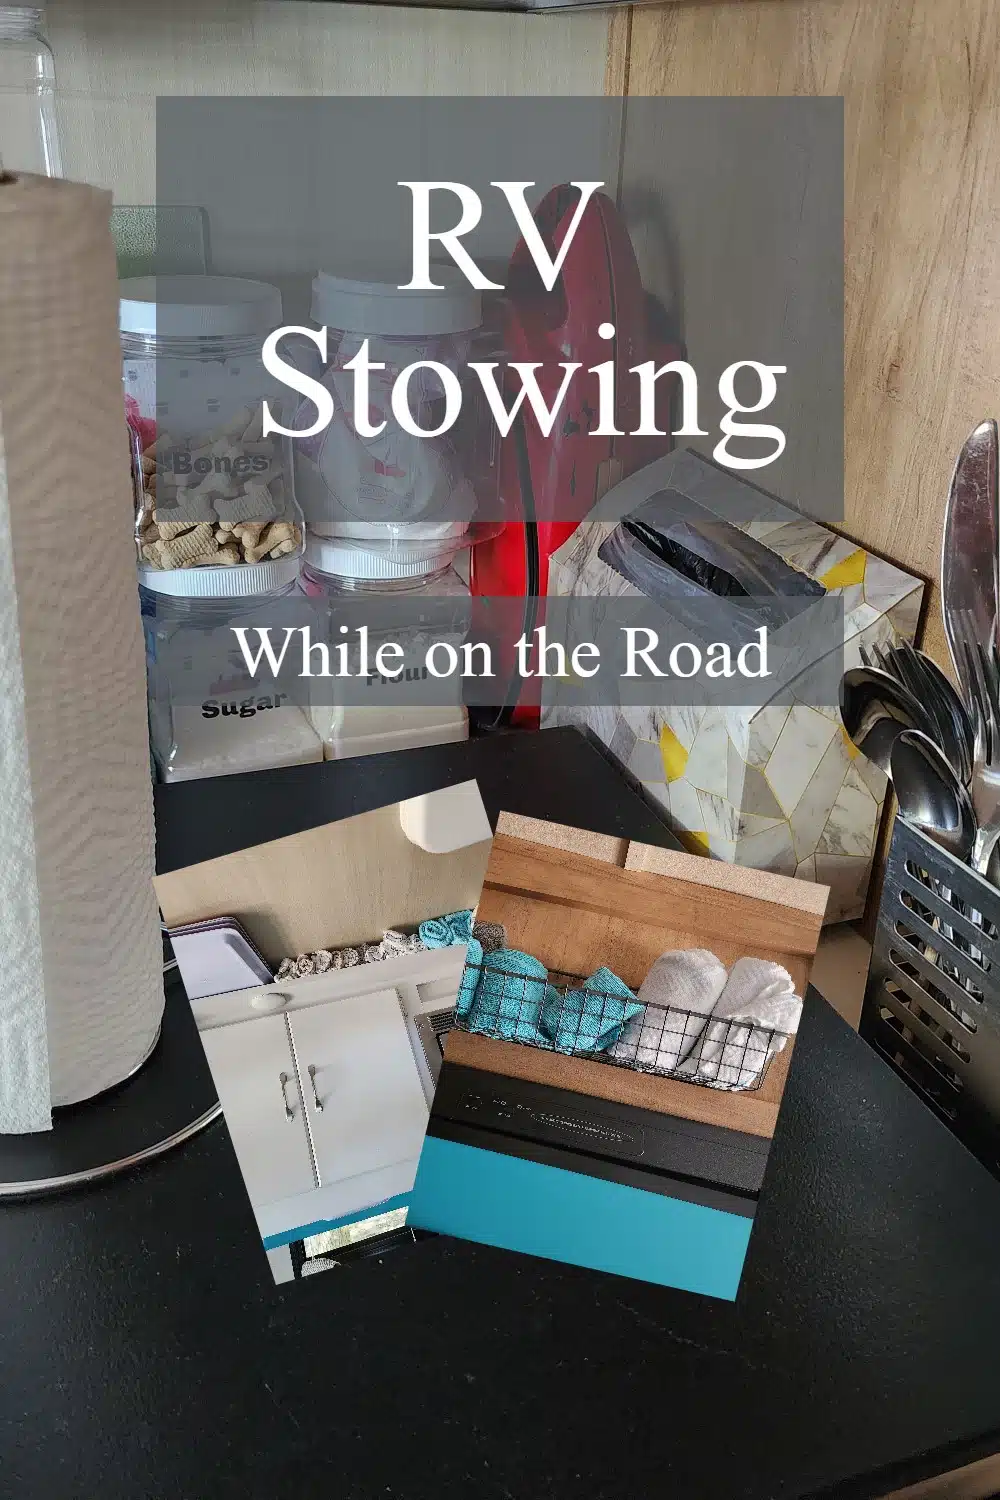 This handy indoor RV checklist will help you to remember what to stow and how to do it before you hit the road on your next camping trip. #rvCAMPINGsolo via @repurposedlife